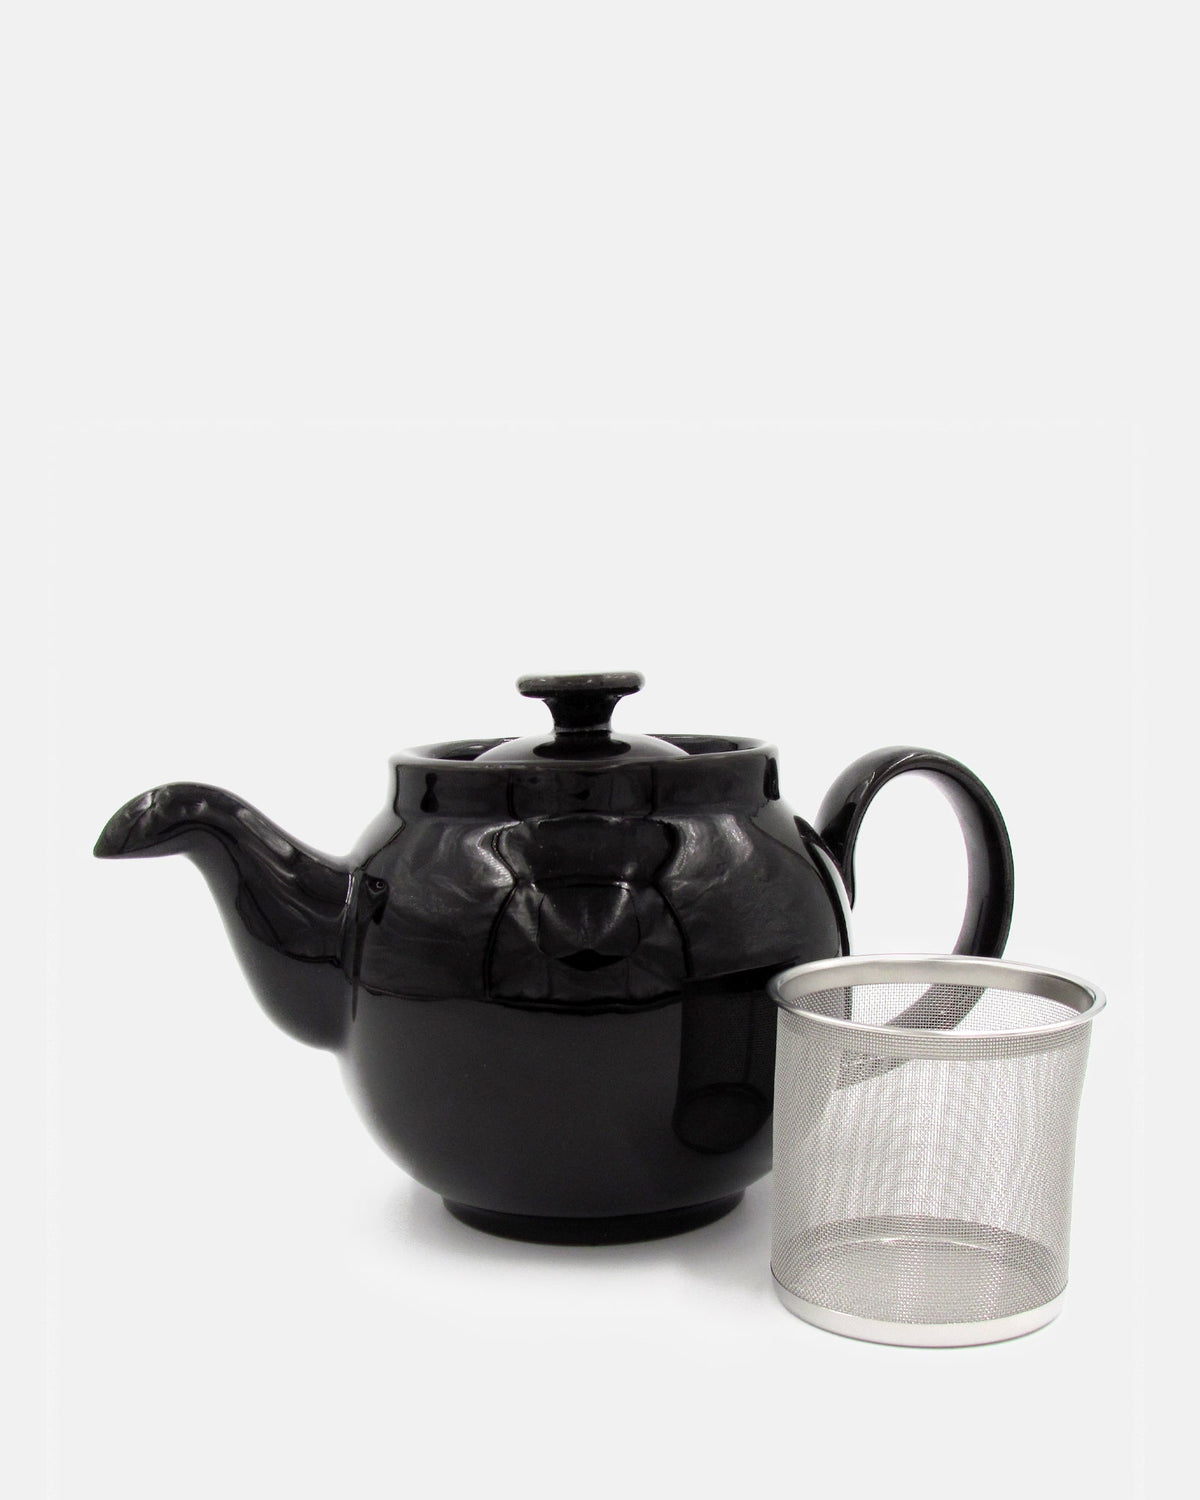 Brown Betty Re-engineered 4 Cup Teapot with Infuser - BRIT LOCKER